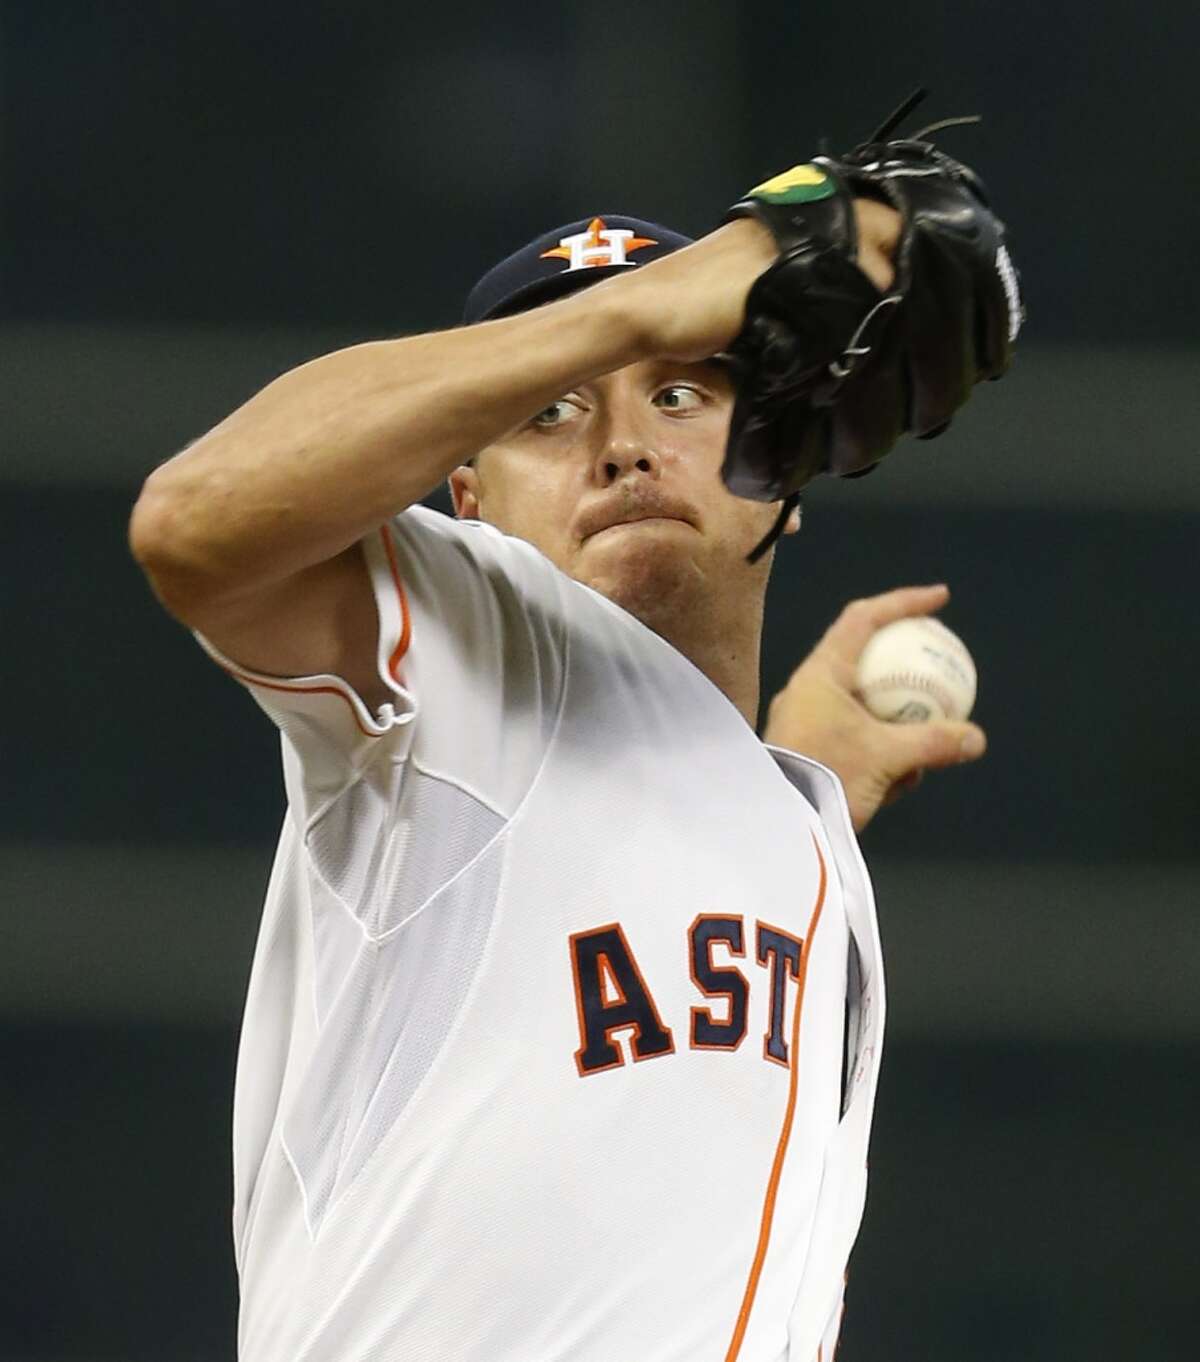 20. Scott Kazmir trade The Astros acquired Scott Kazmir from the A’s on July 23, showing their willingness to add to the payroll at the trade deadline to compete down the pennant stretch.